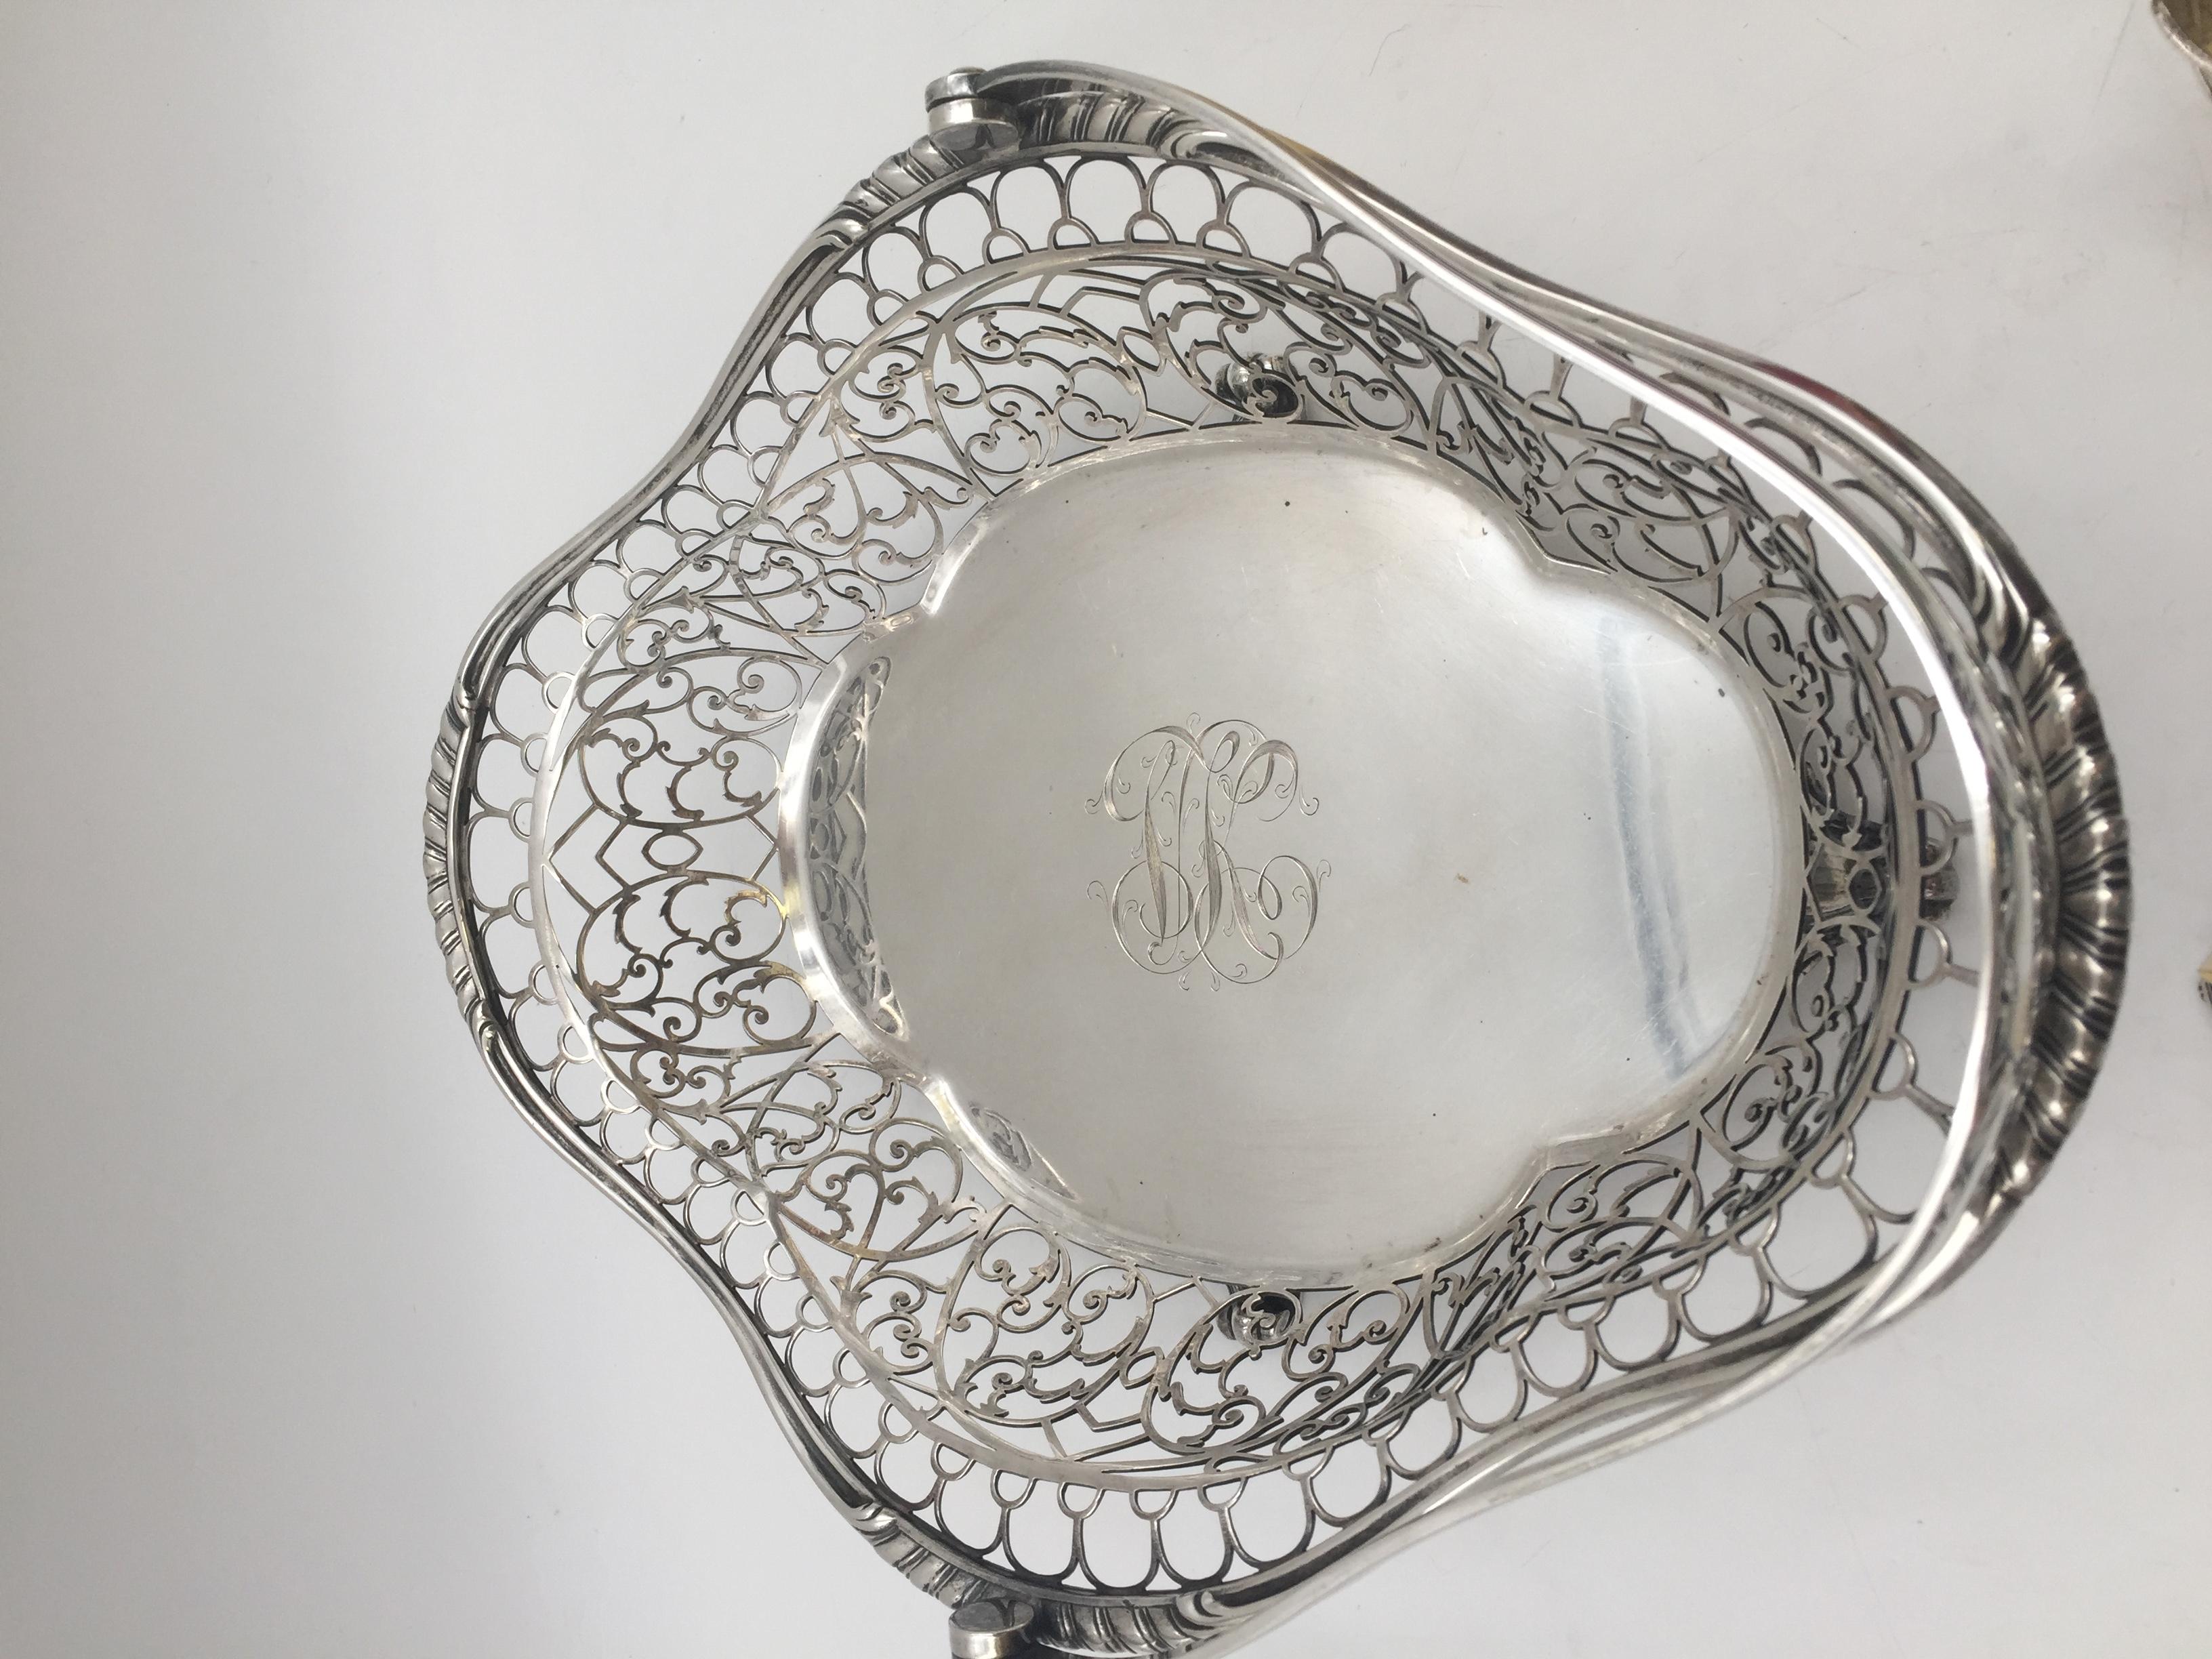 A sterling silver fruit or flower basket bowl by Marcus & Co. Pierced rim, acanthus motif on handle, standing on four scrolled feet. Measuring approximately 11 5/6 inches in length by 10'' in height by 9'' in width. Weighing 25.5 troy ounces.